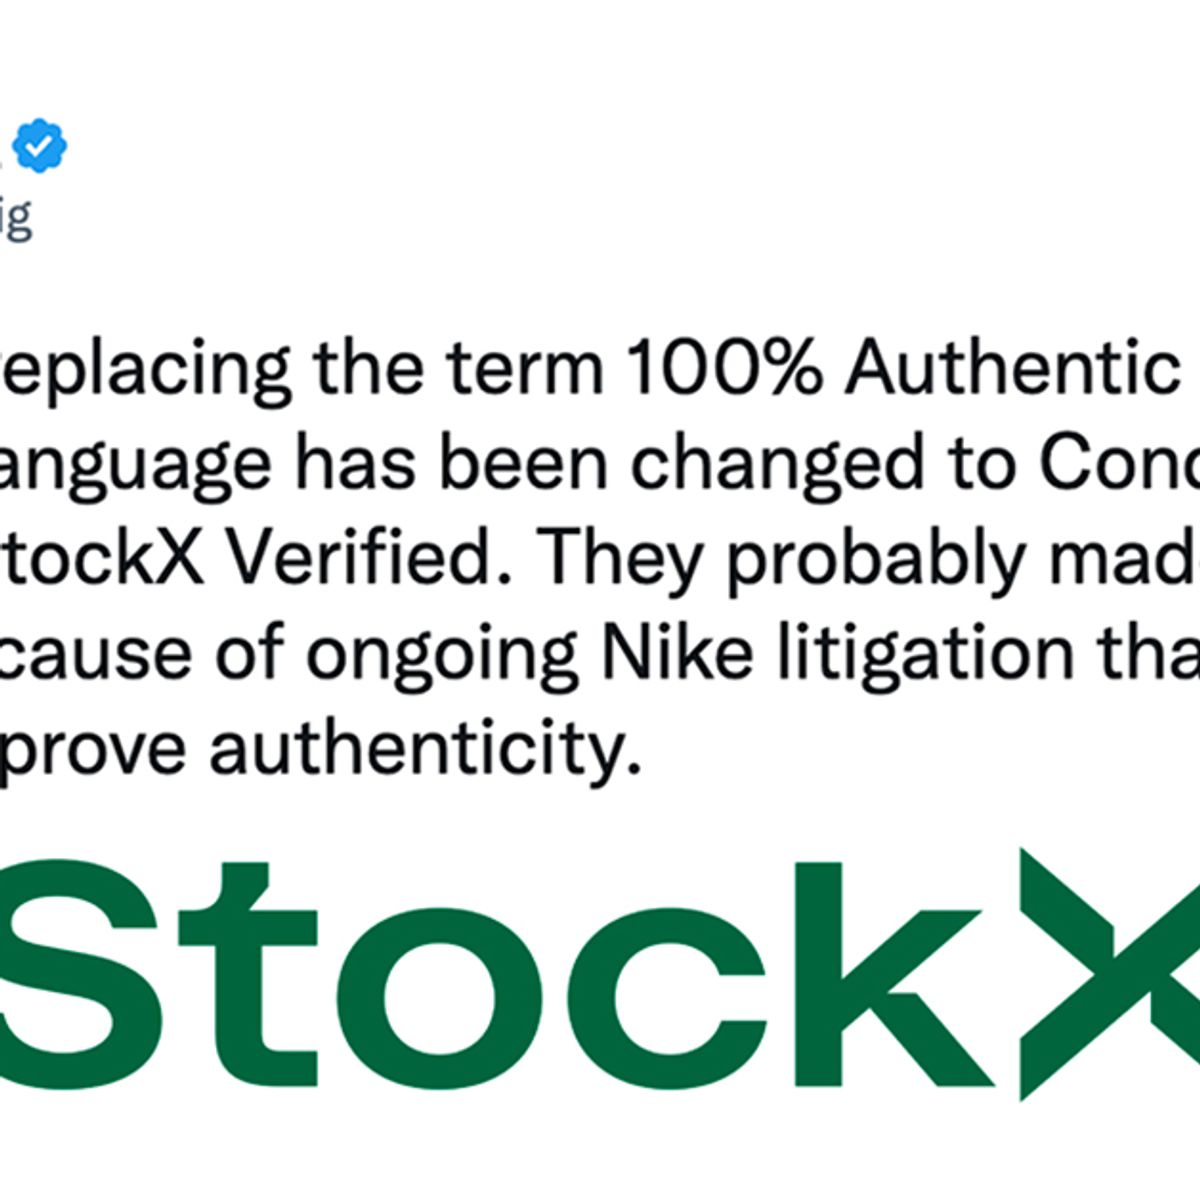 Stockx is no longer guaranteeing authentication #sneakers #stockx